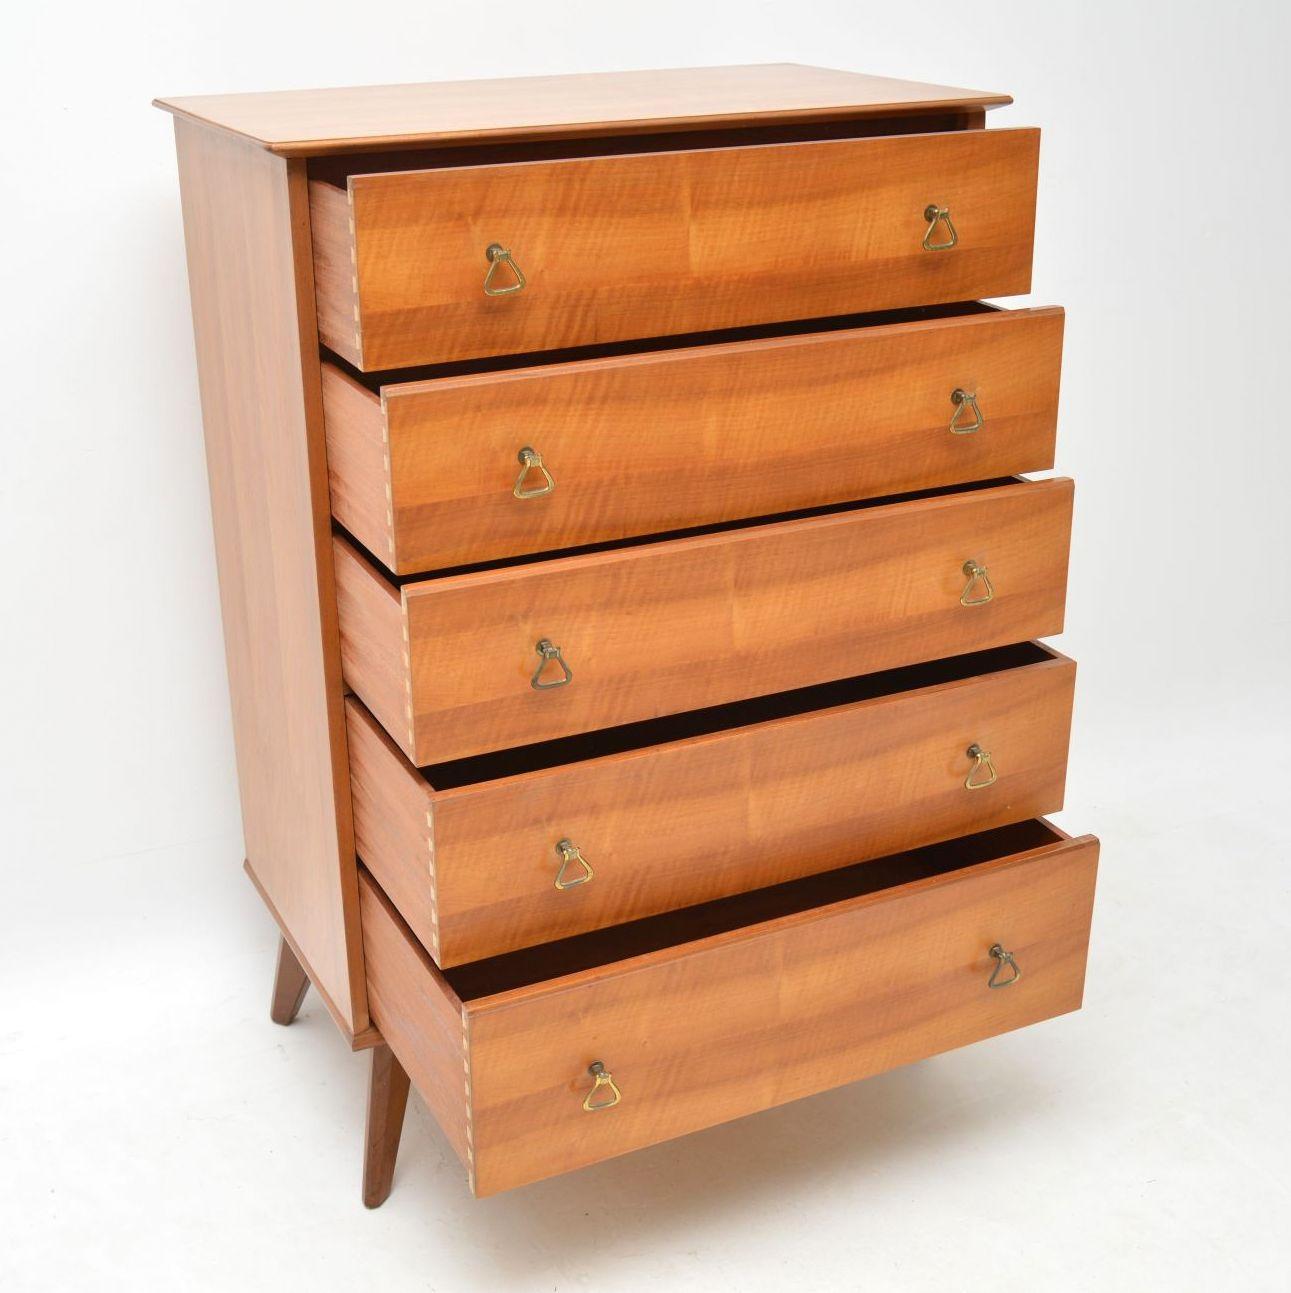 A beautifully made, quite large and very practical vintage chest of drawers in Walnut by the high end manufacturer Alfred Cox, this dates from the 1960s. The quality is superb and its in lovely original condition; this is clean, sturdy and sound